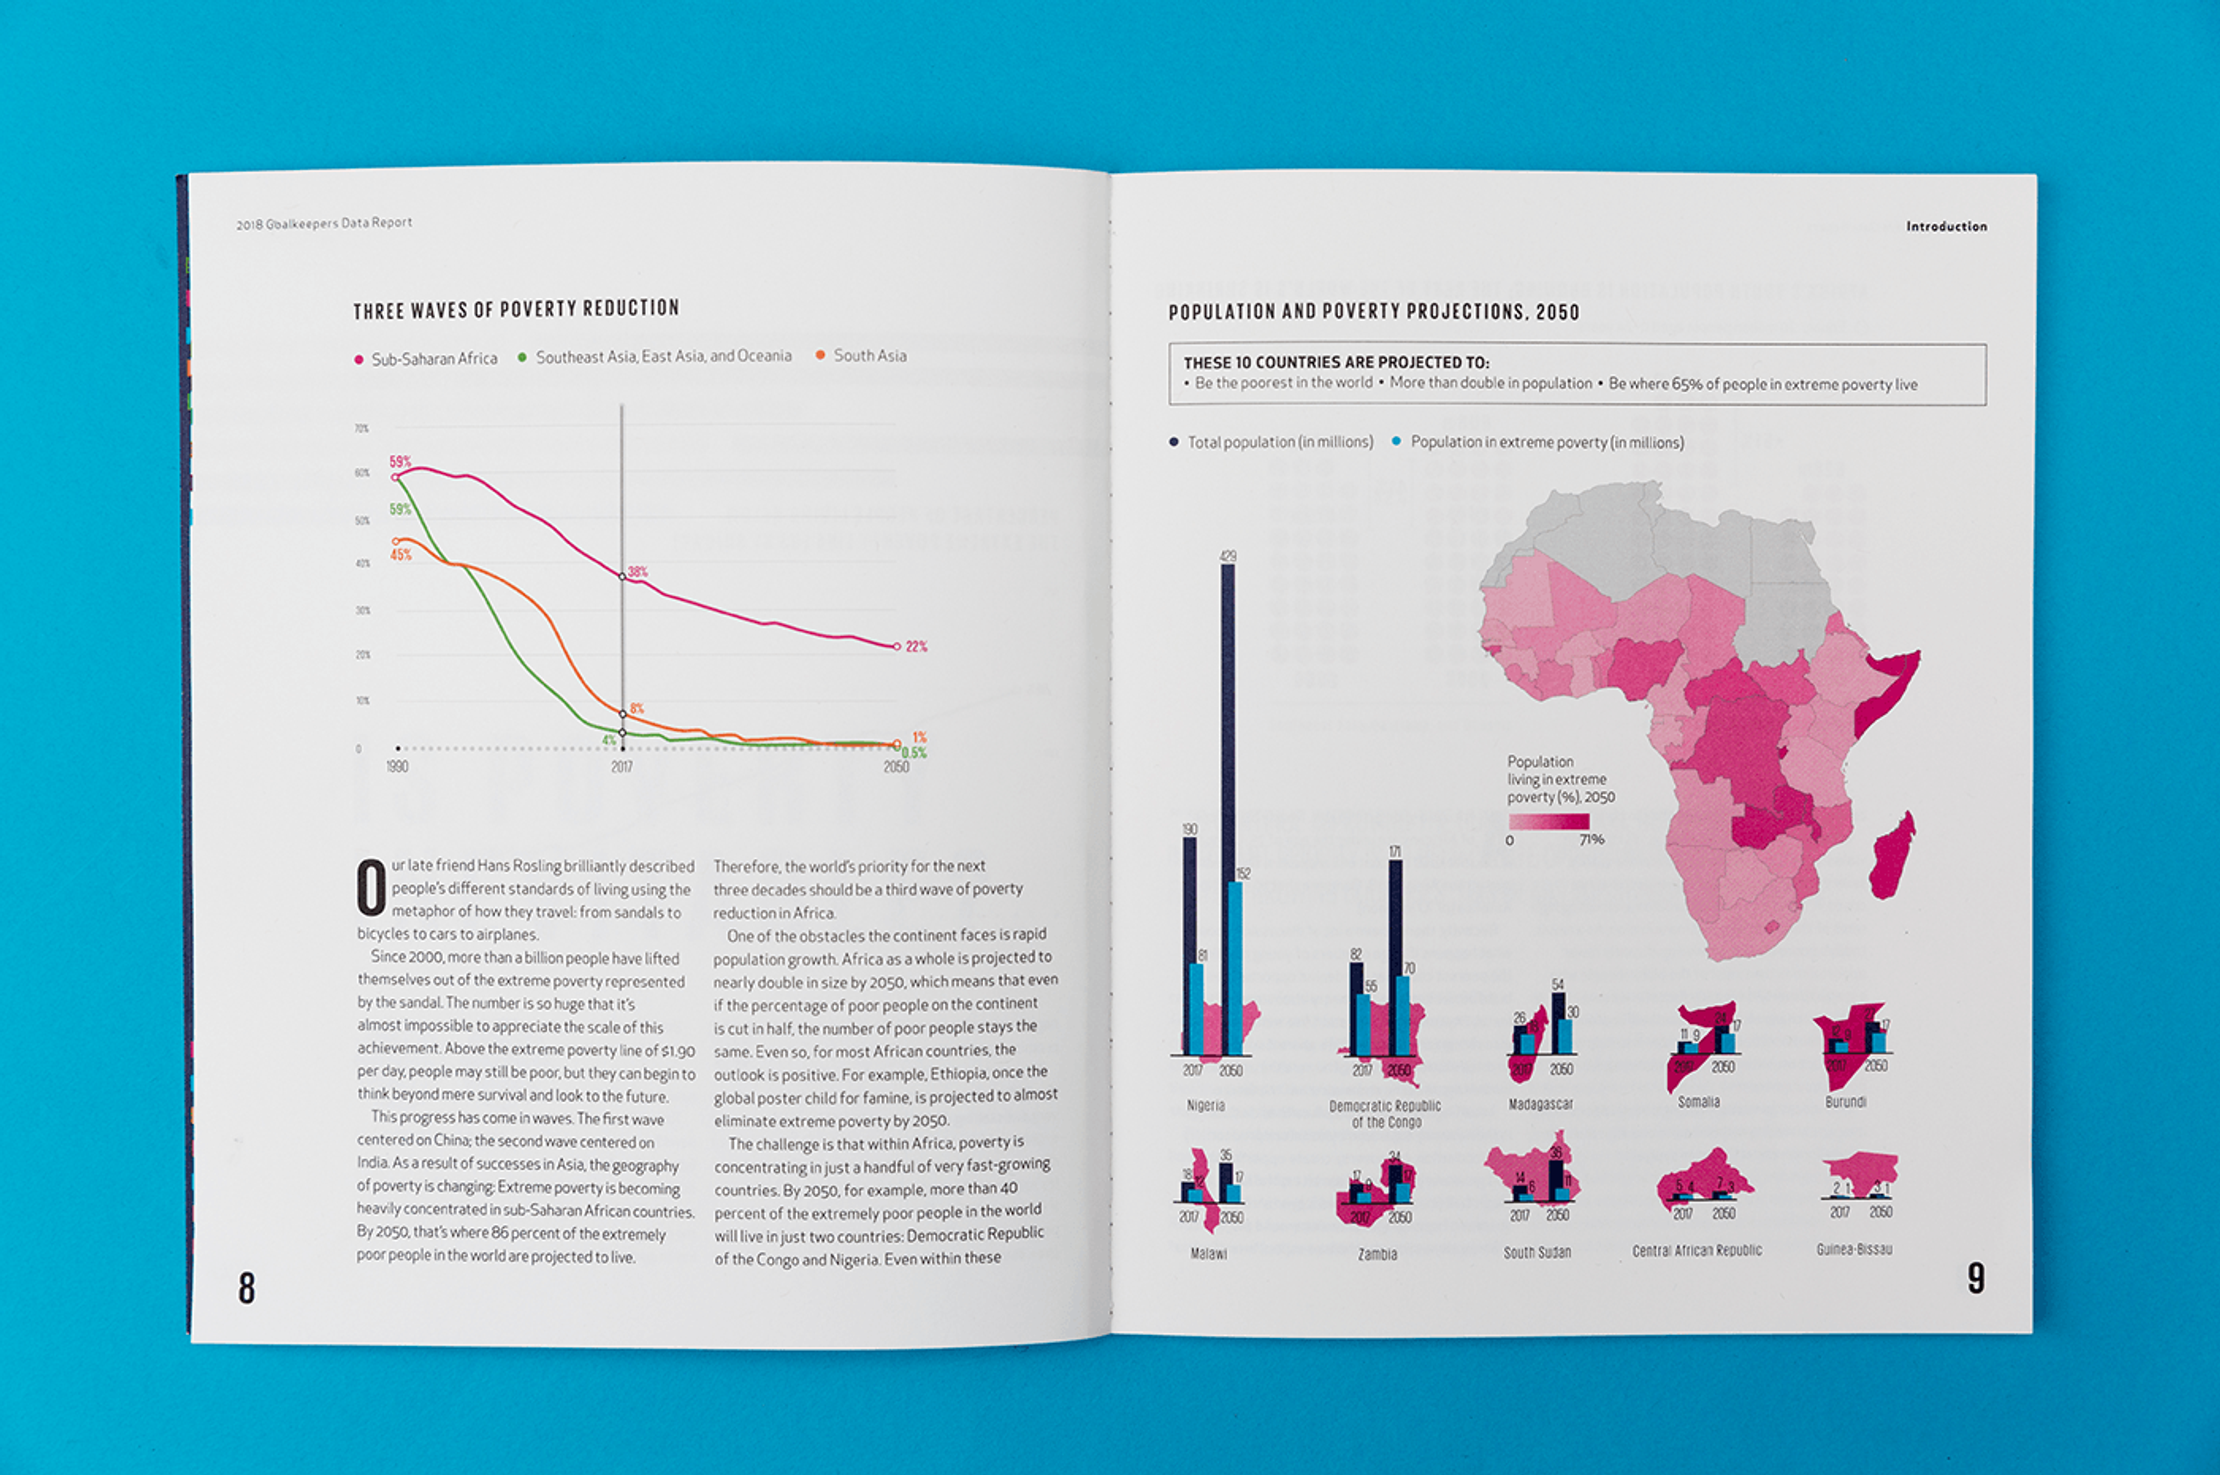 A double page spread of the printed Goalkeepers report. On the left page is a line chart above some paragraphs of copy. On the right is a map of Africa with most countries in different shades of pink. There are also bar charts for select countries. These visuals show the extent of extreme poverty in different countryies' populations by 2050.